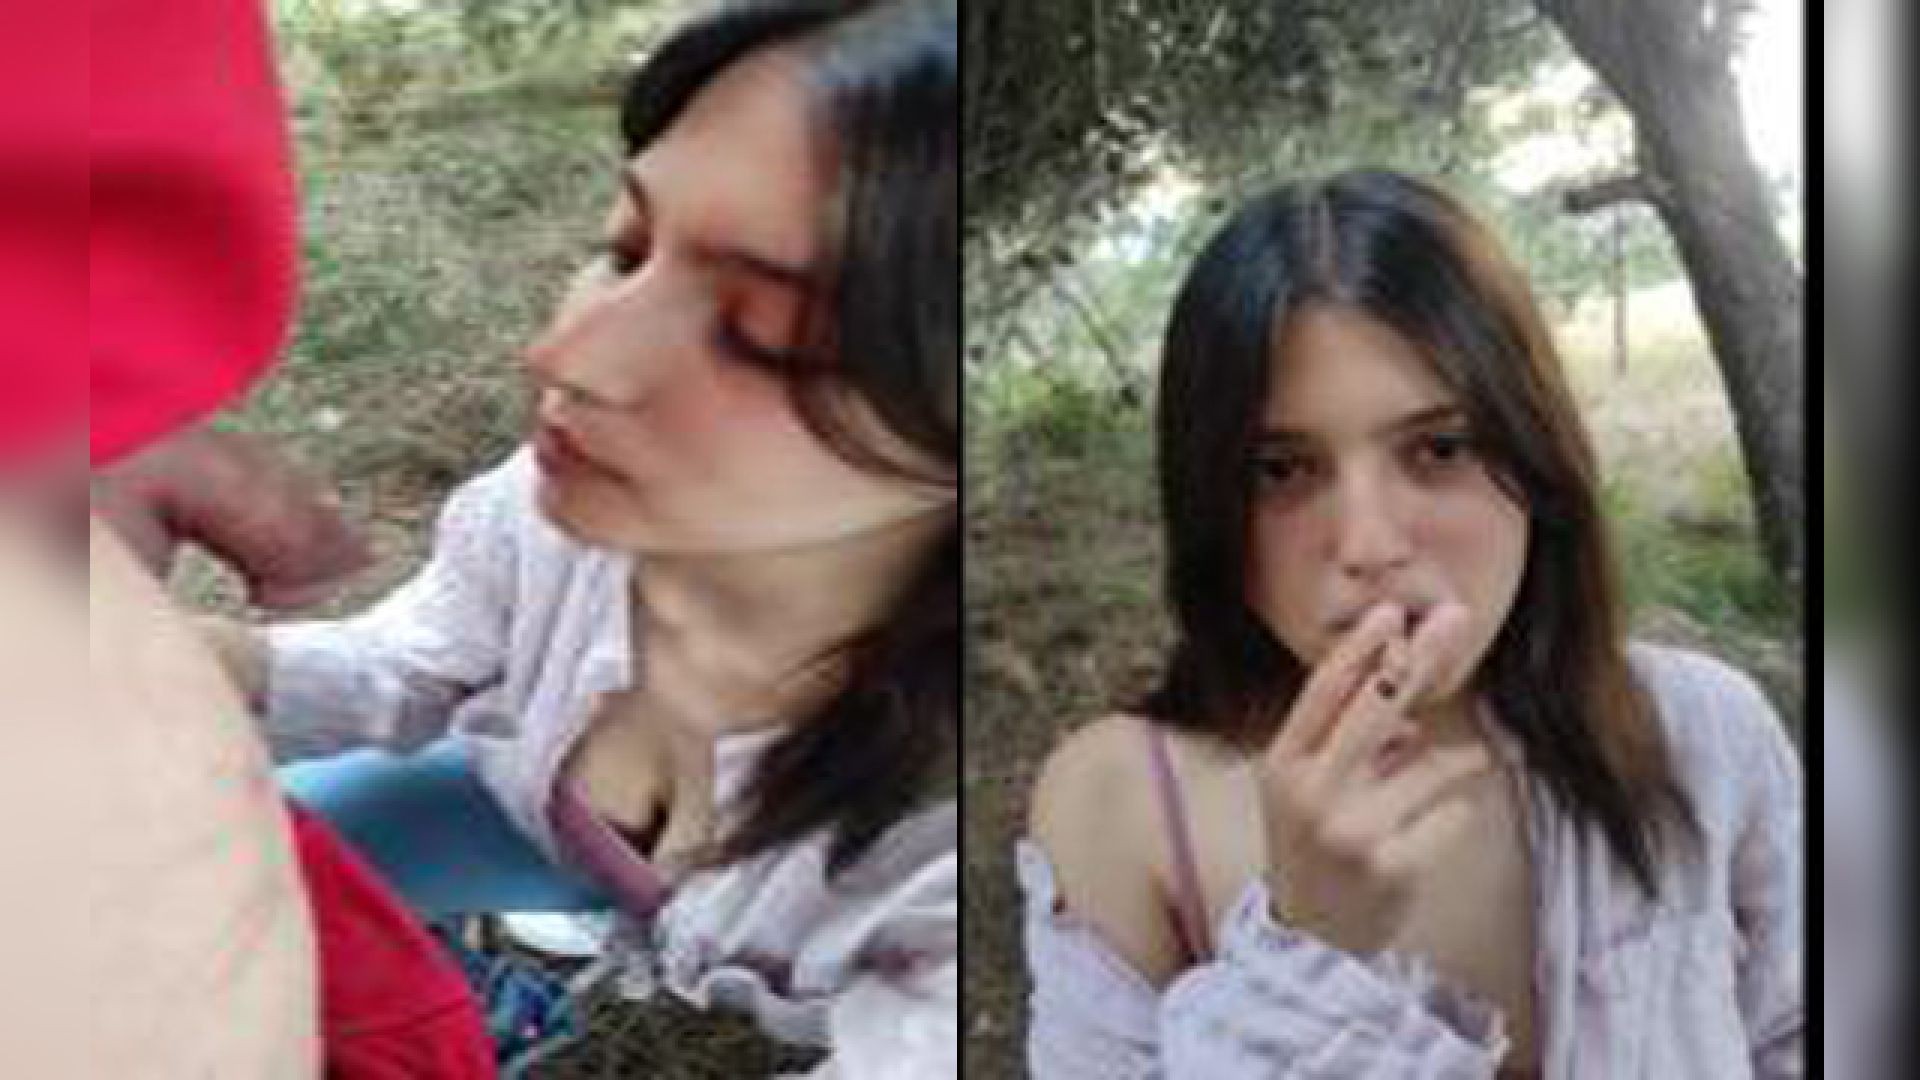 Today Exclusive- Gf smoking and fucking outdoor photo